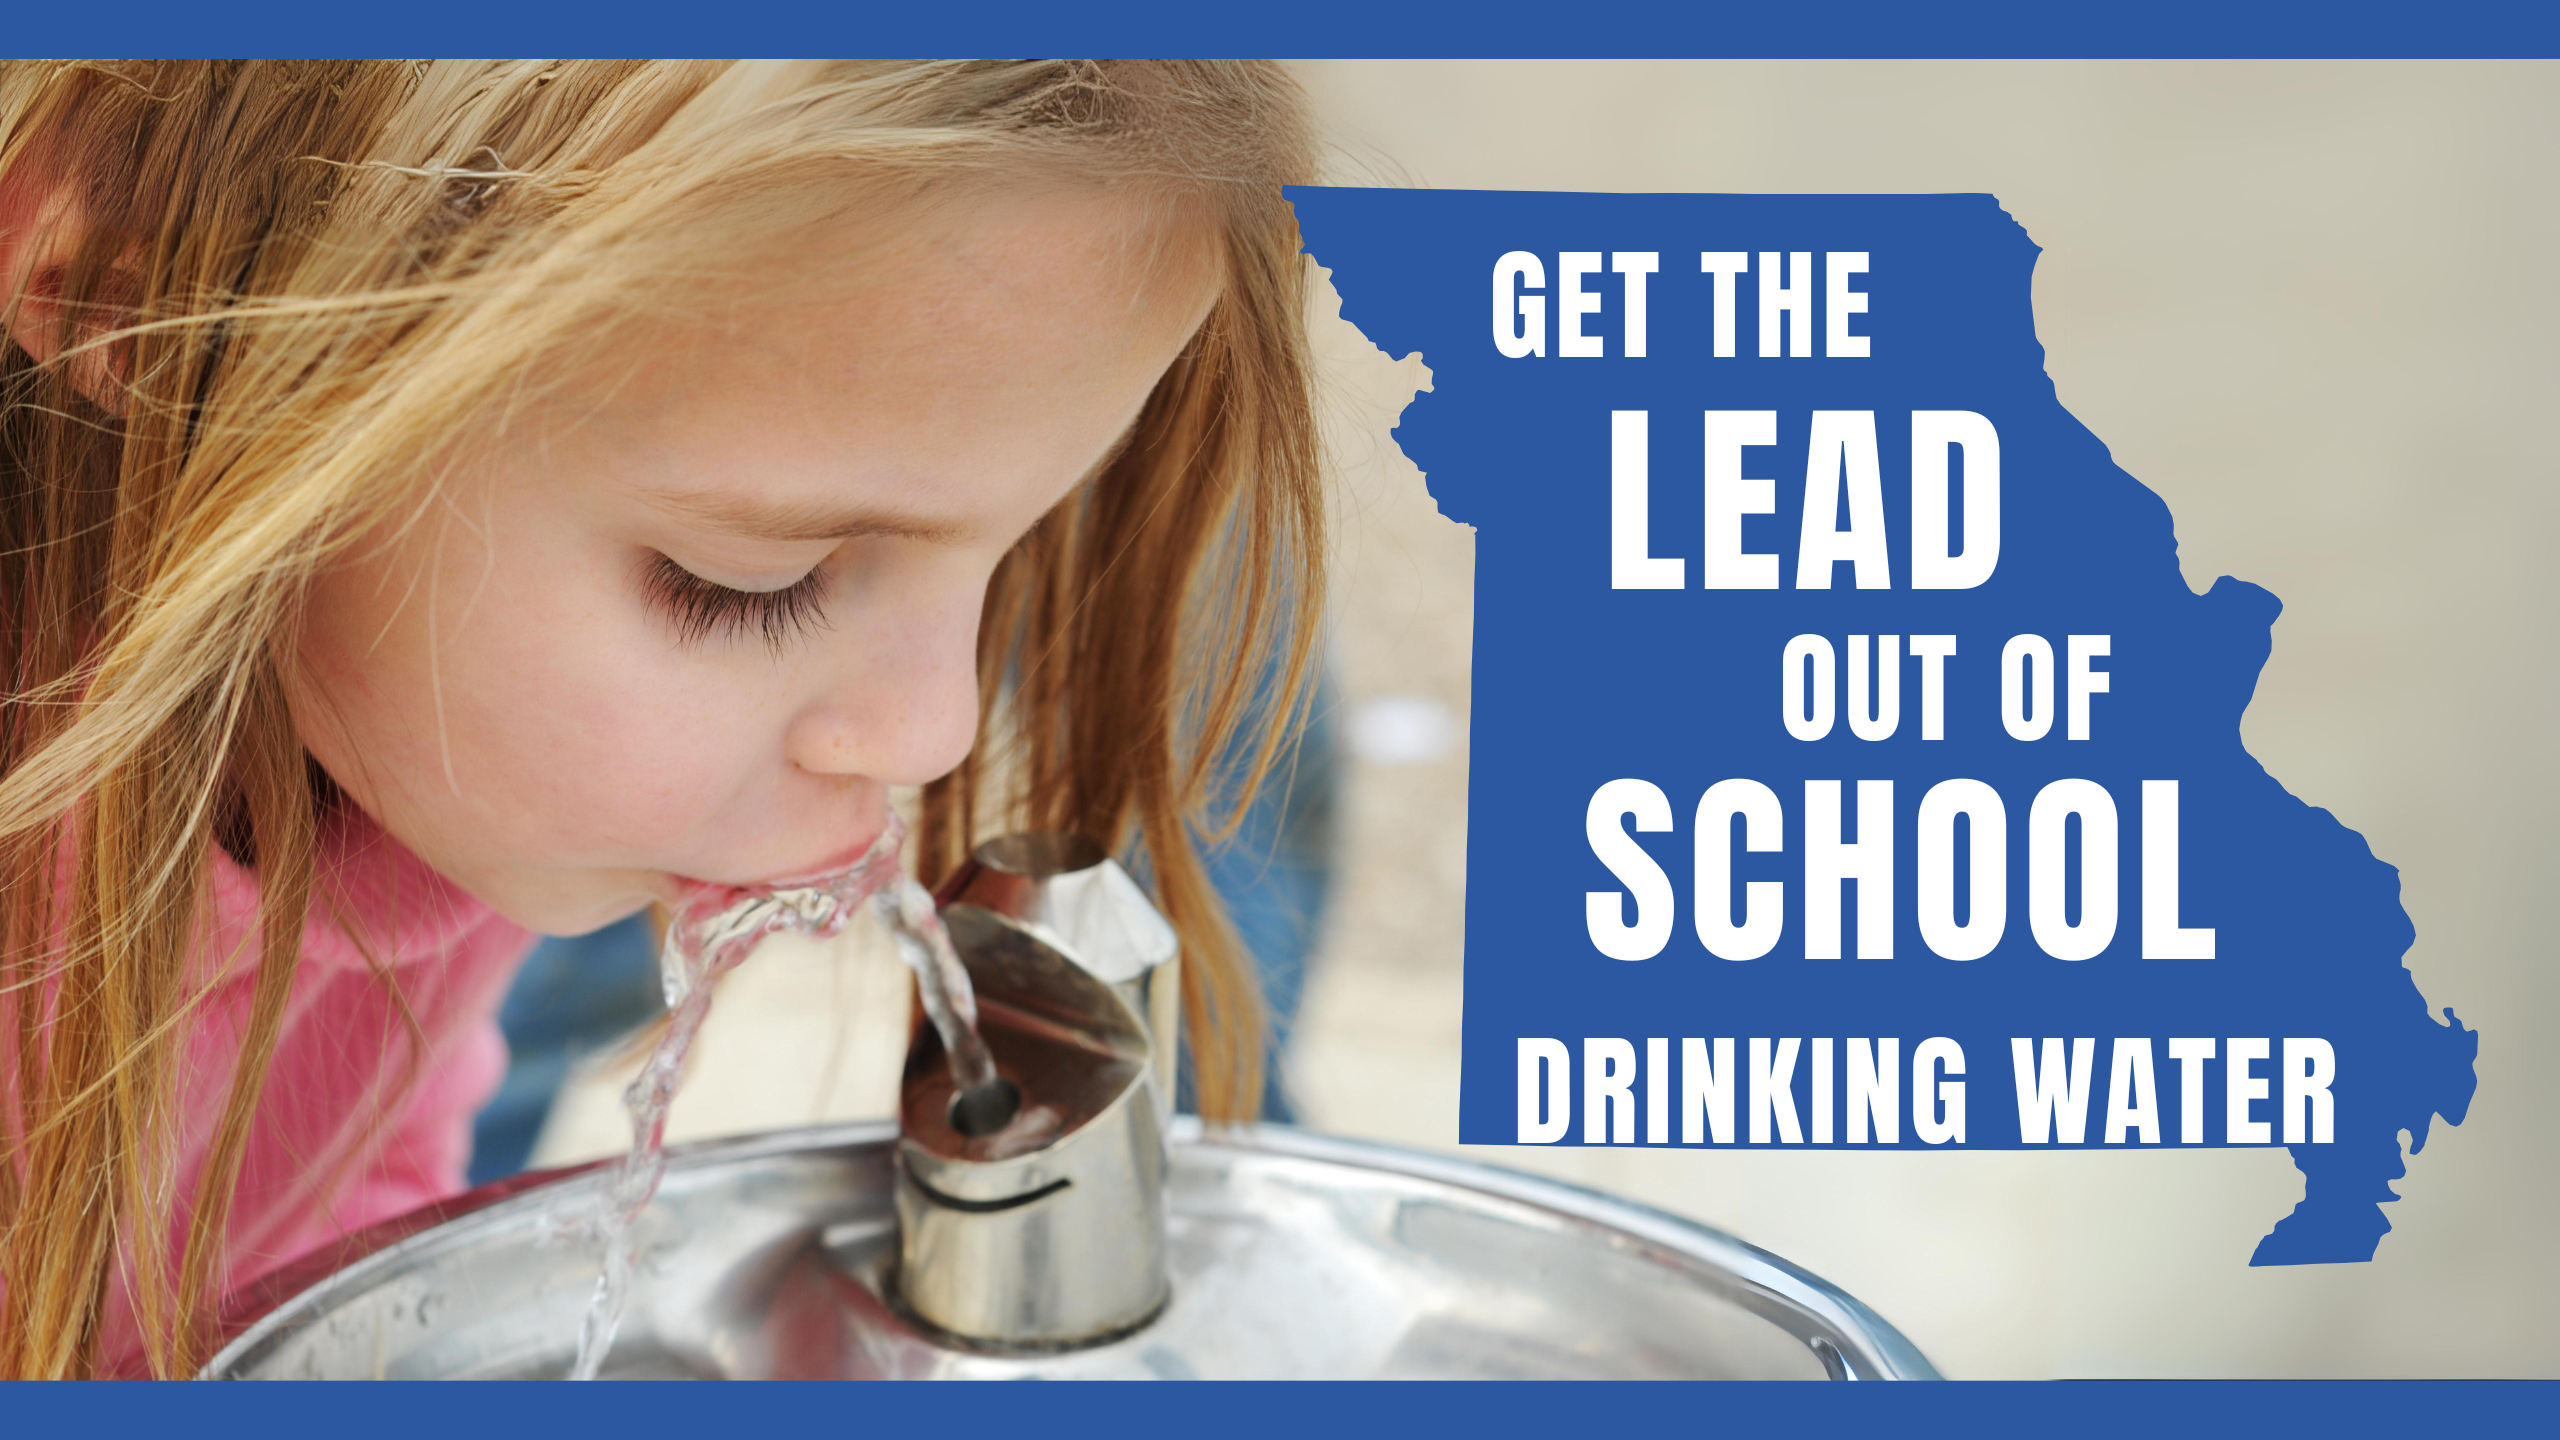 GET THE LEAD OUT OF SCHOOL DRINKING WATER